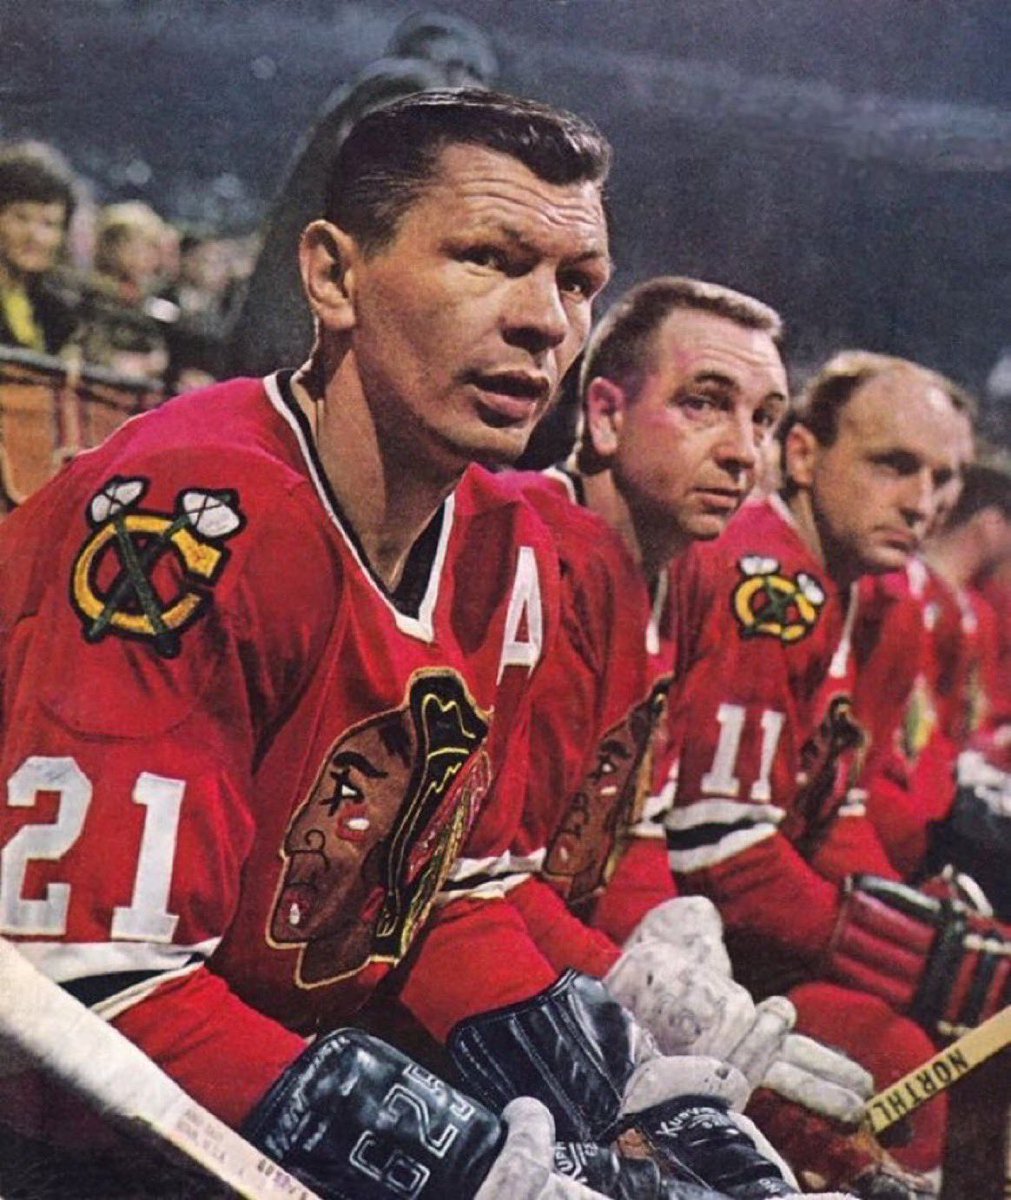 The Chicago Blackhawks set an NHL record in 1968 when their roster’s median age was “Served with distinction in World War II.”